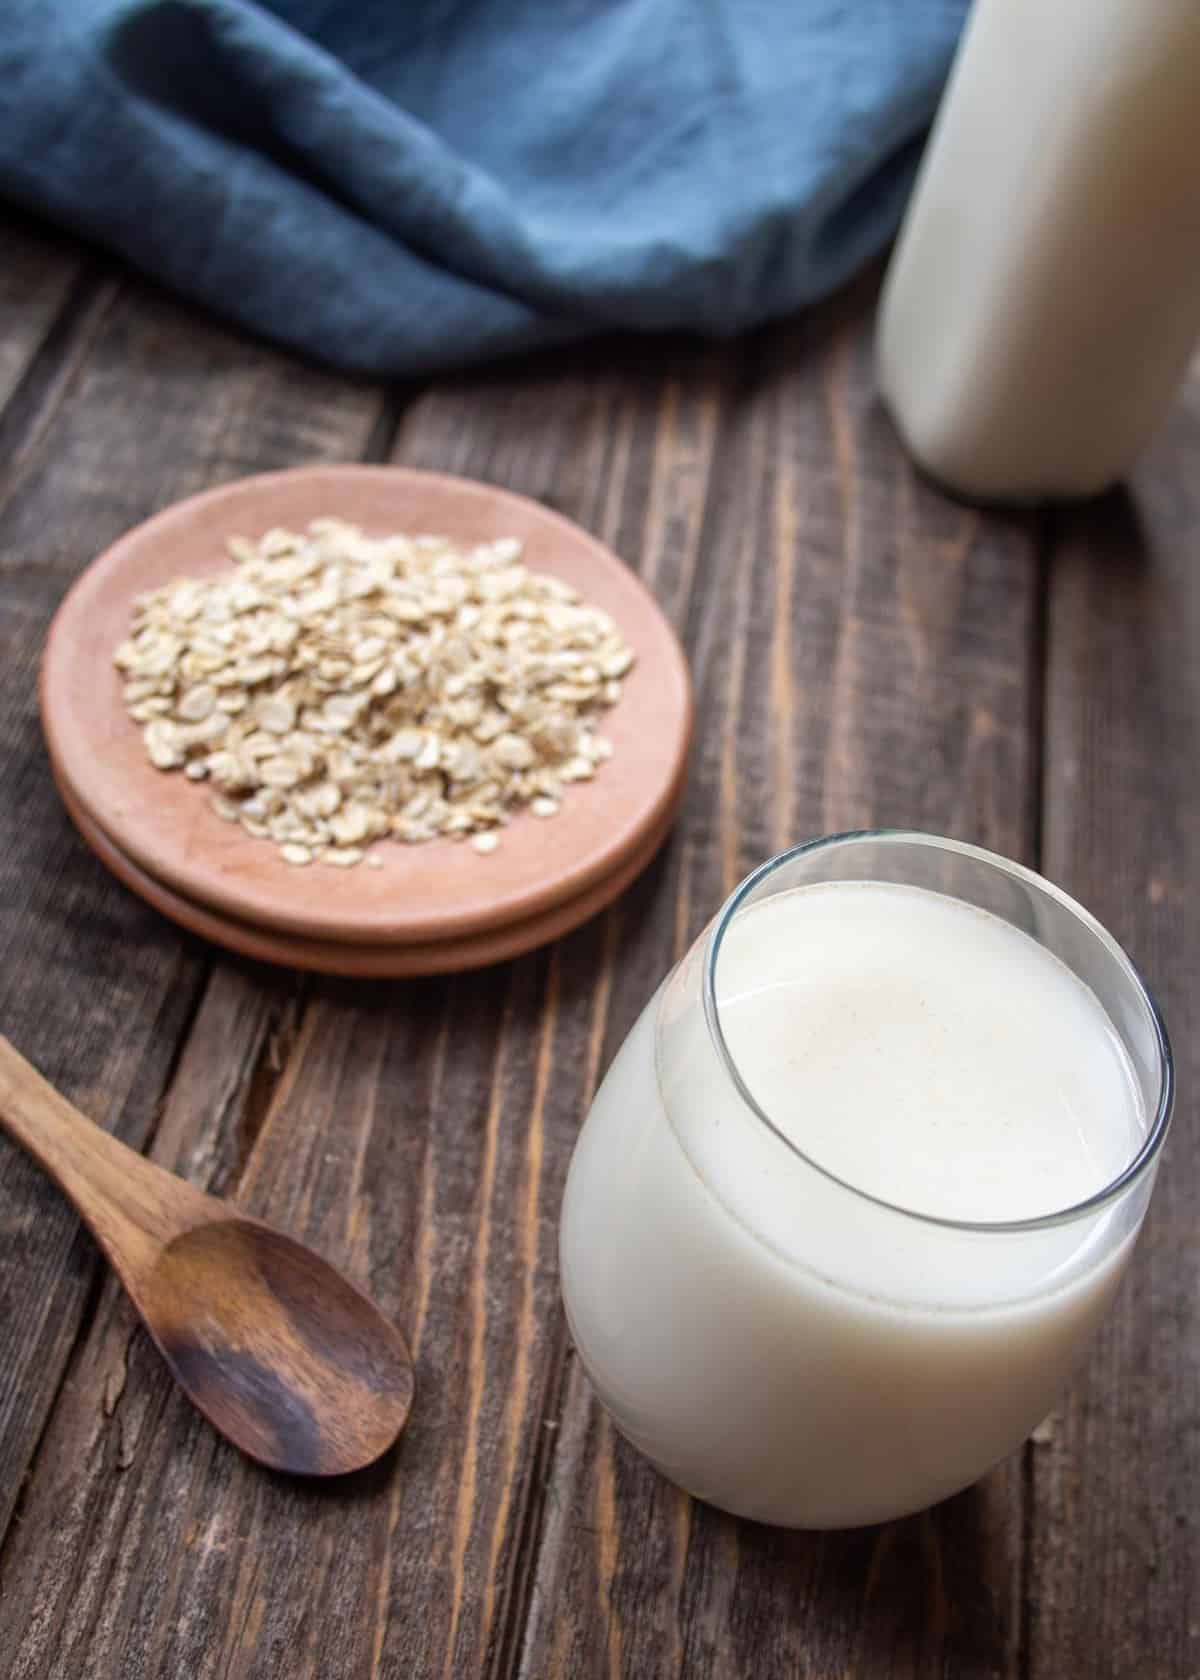 Homemade Oat Milk In Glass with Oats On Side